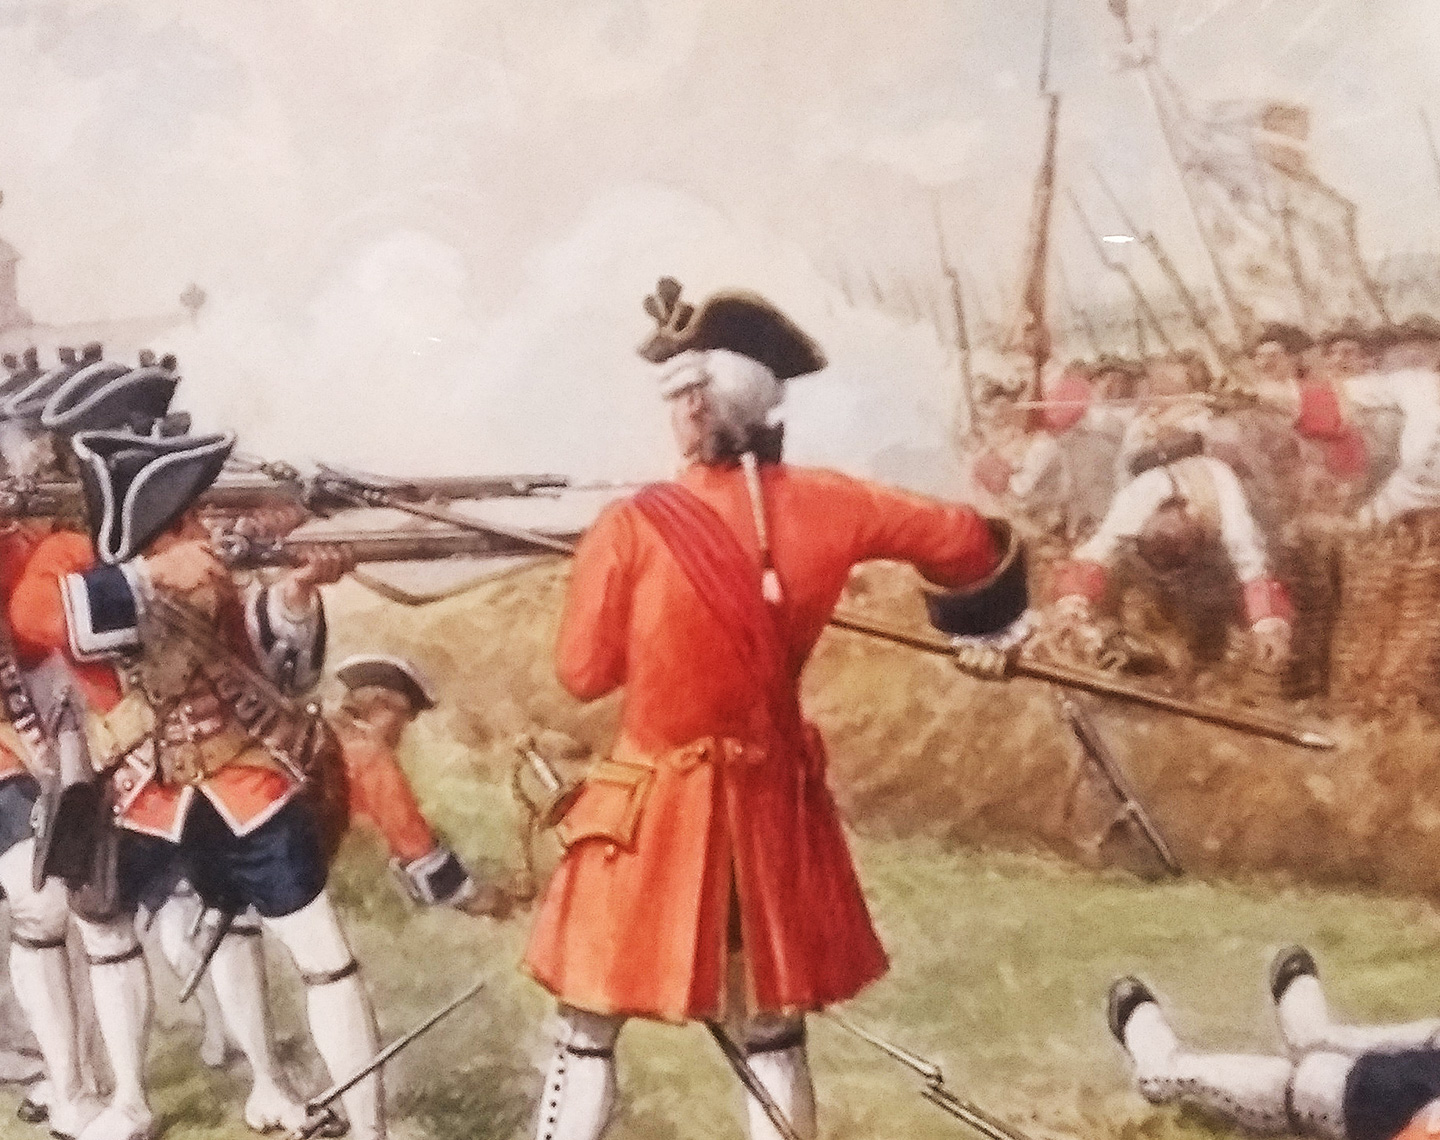 The wars of the 1700s - The Guards Museum